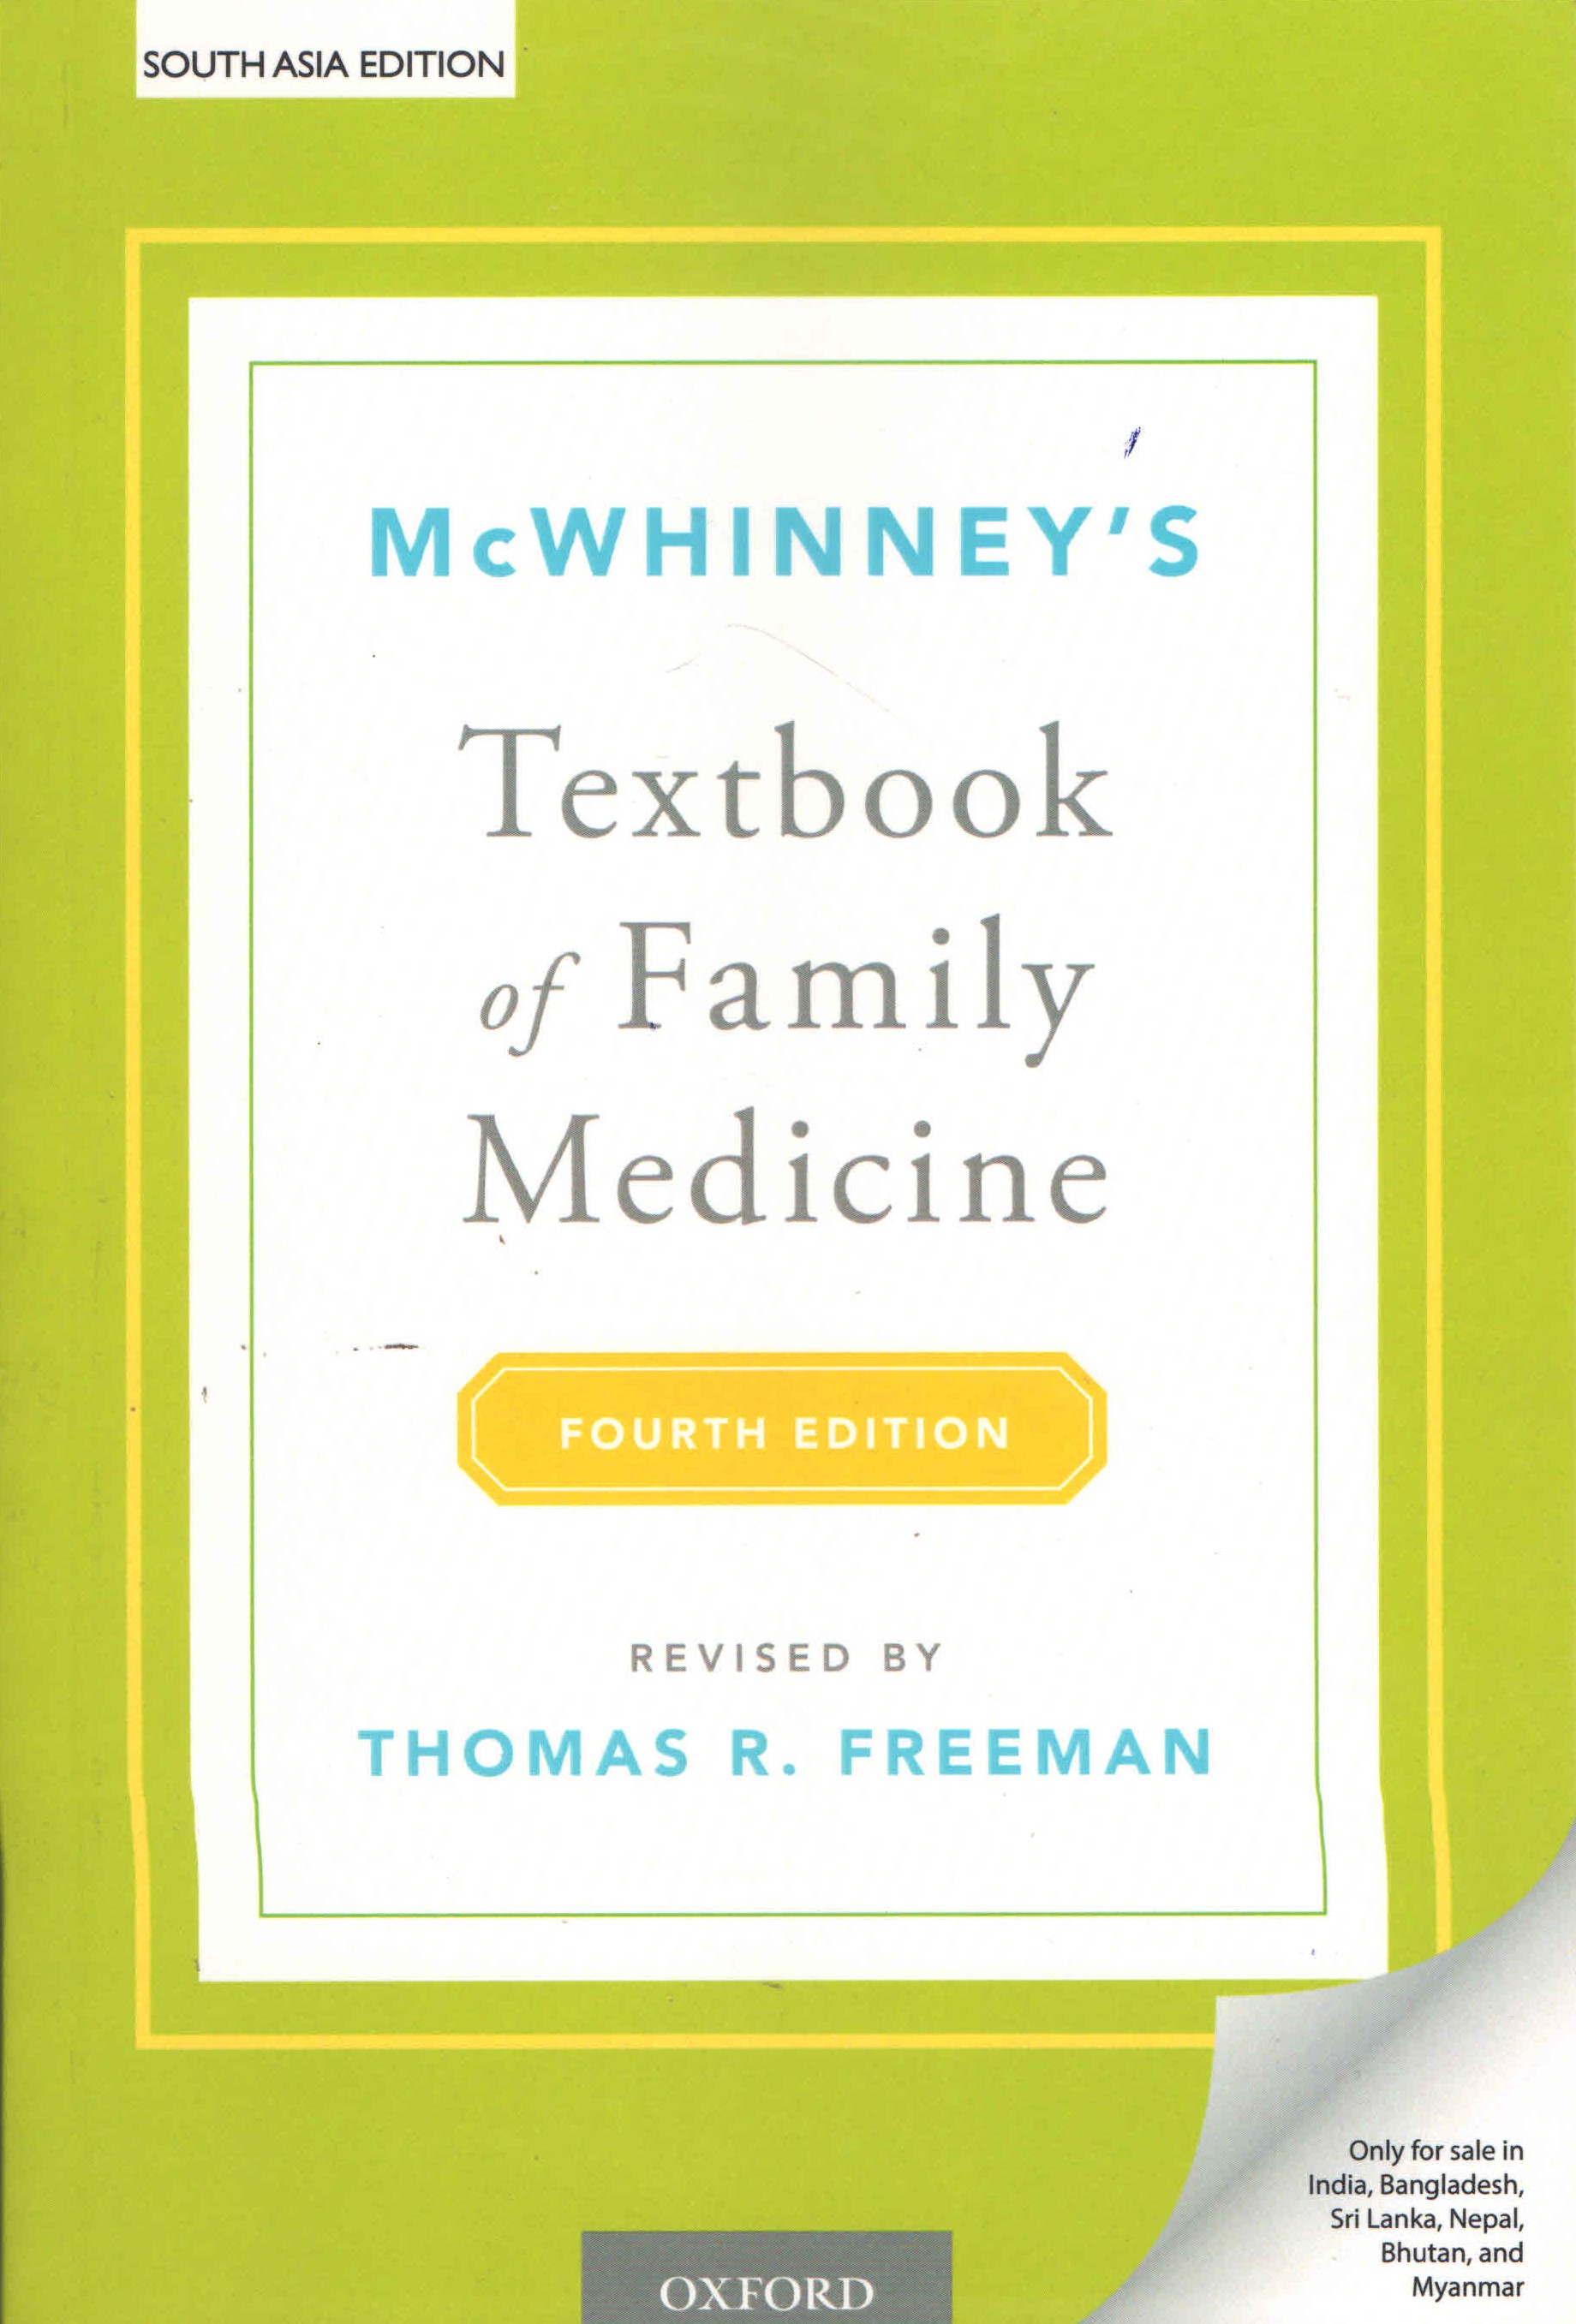 

exclusive-publishers/oxford-university-press/mcwhinney-s-textbook-of-family-medicine-9780197770634